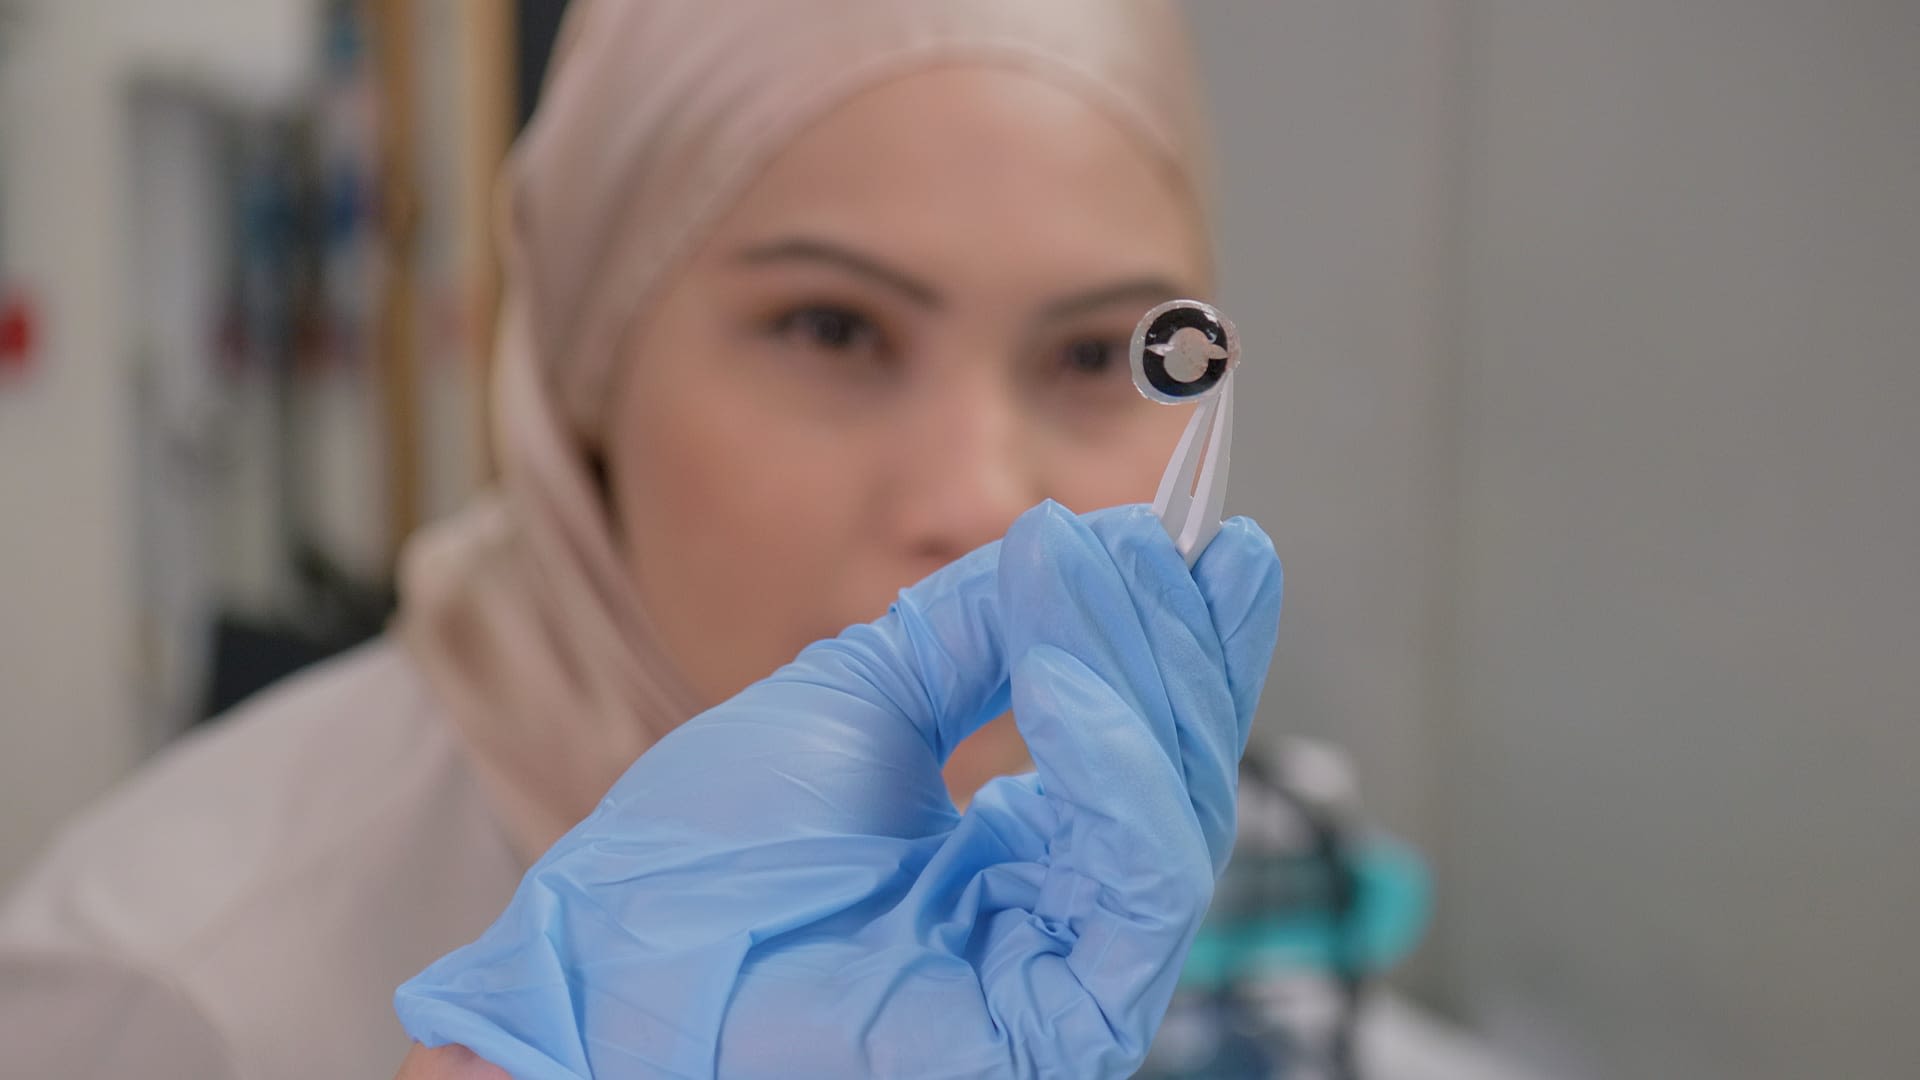 Scientists develop ultra-thin battery for smart contact lenses that could be charged by tears